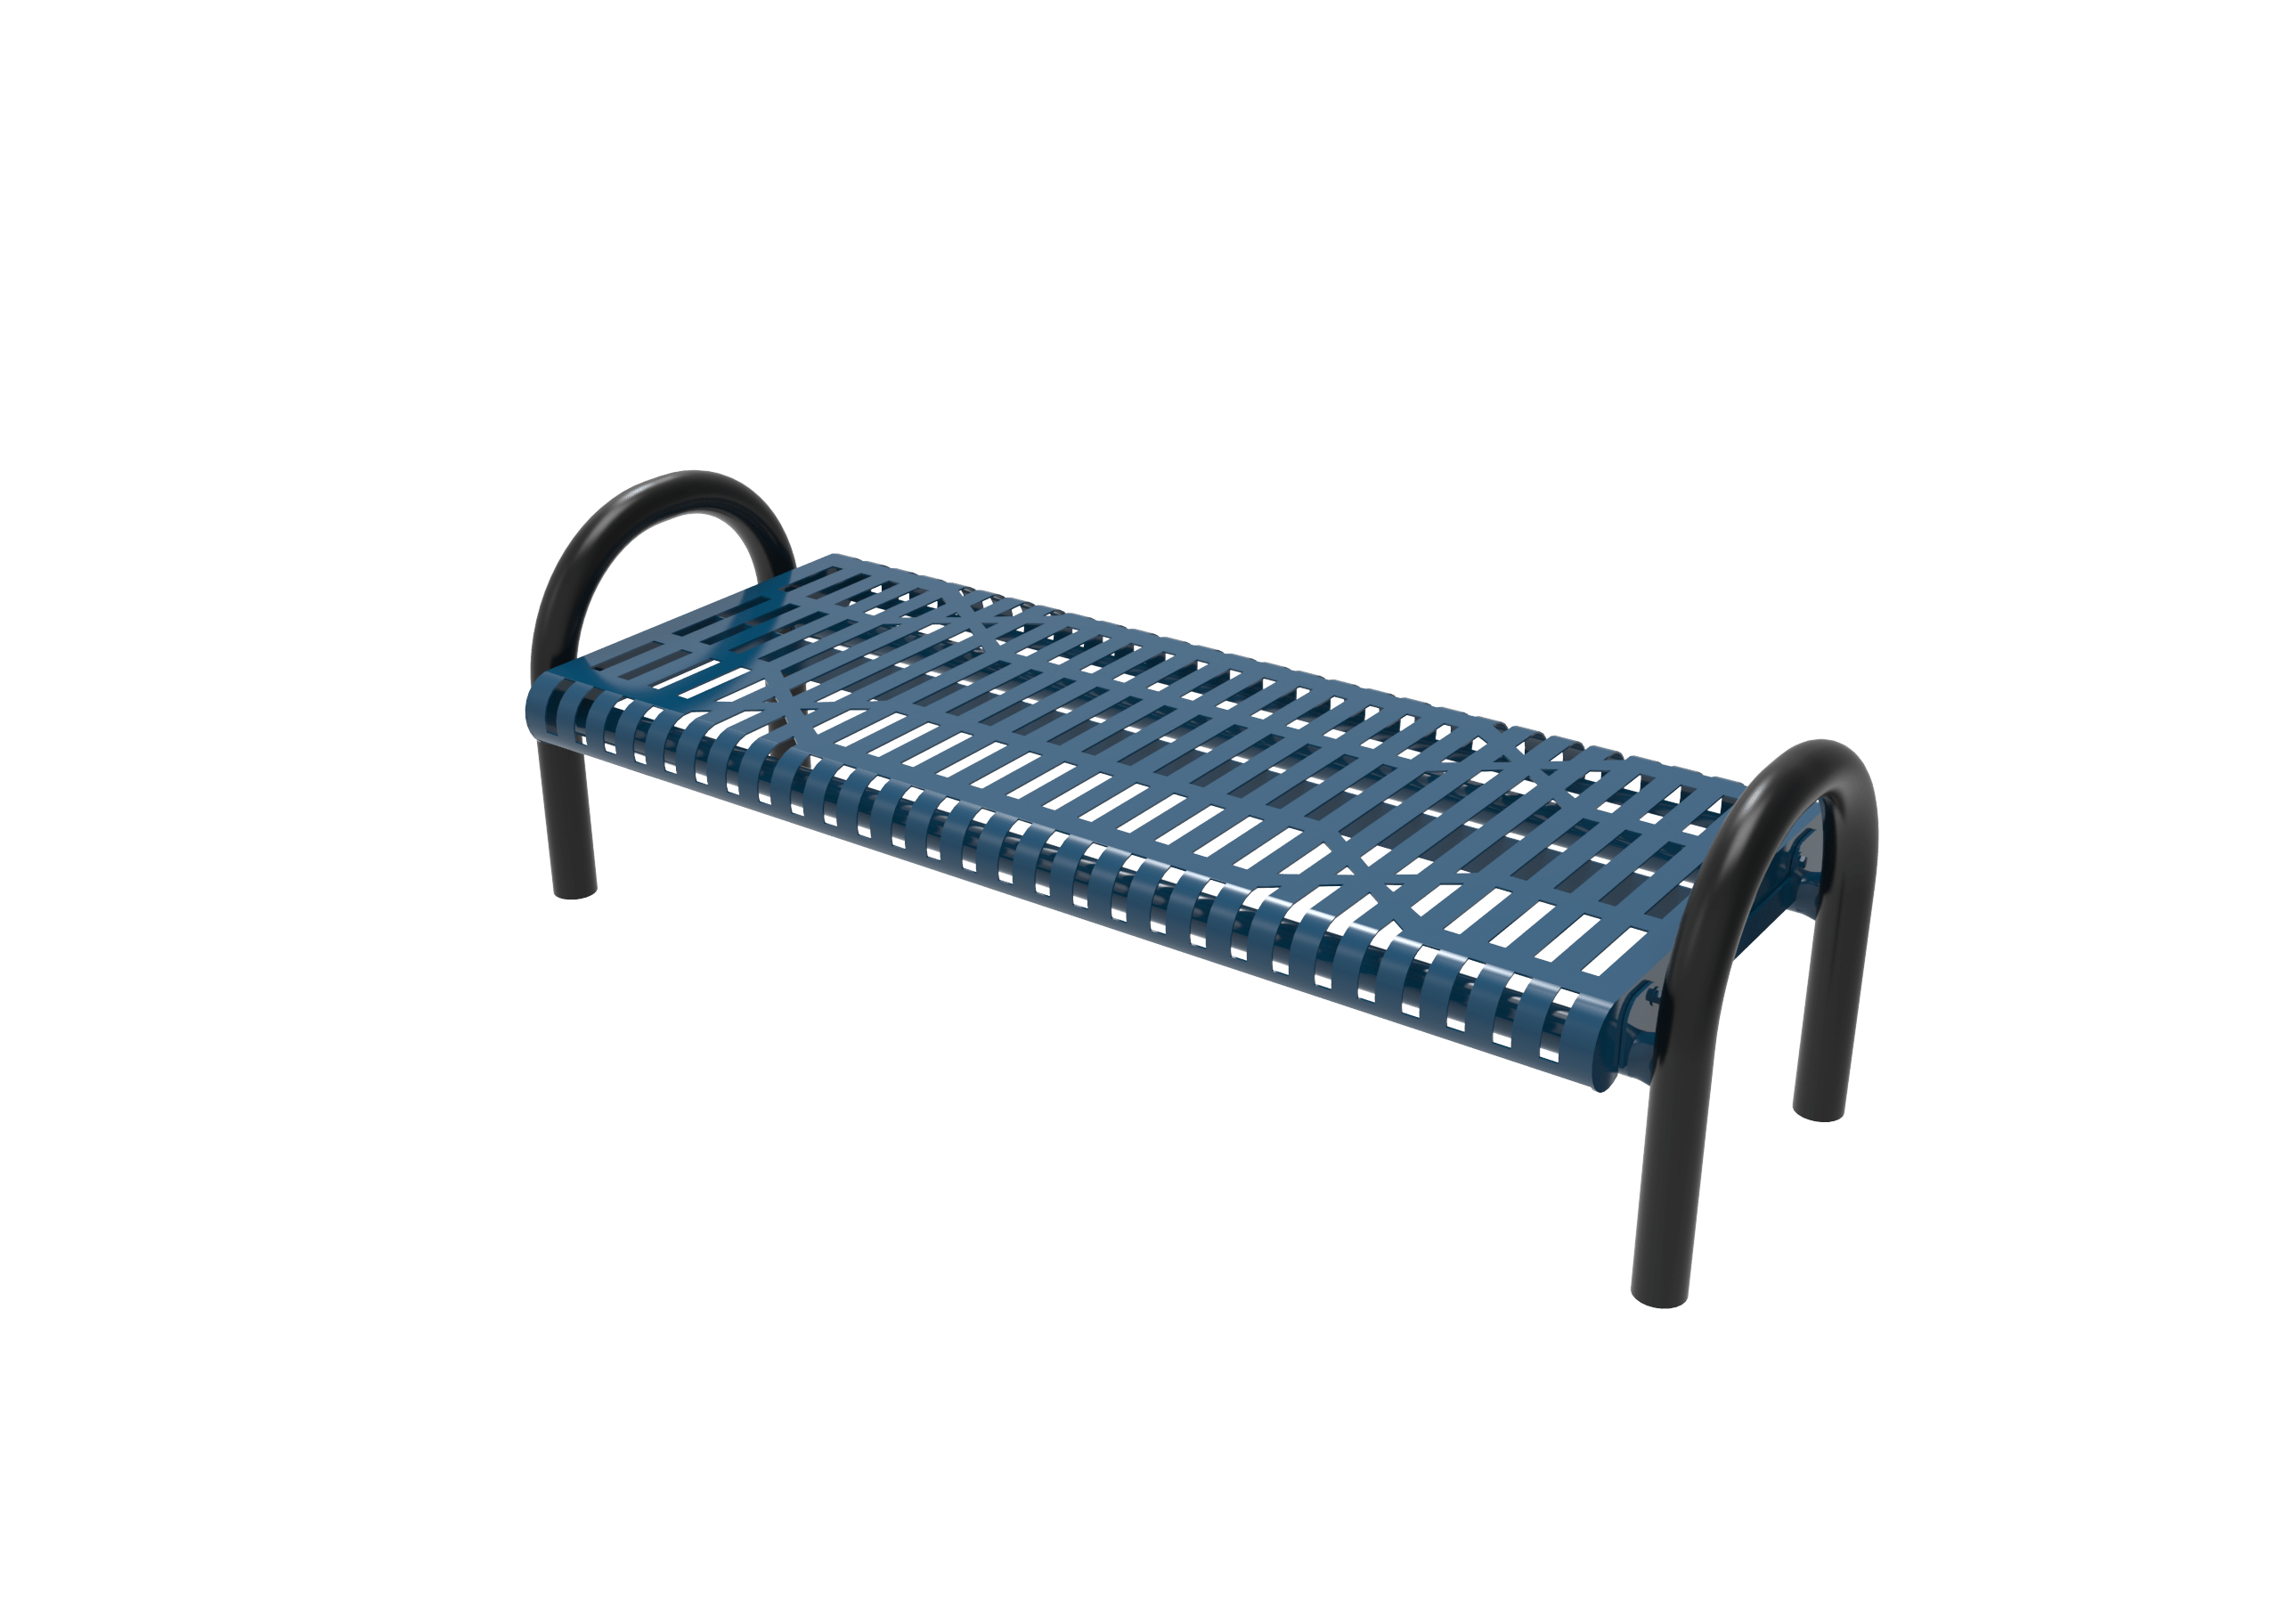 6′ Bench Without Back In Ground-Slat
BMD06-F-59-000
Industry Standard Finish
$1199.00
BMD06-E-59-000
Advantage Premium Finish
$1509.00
